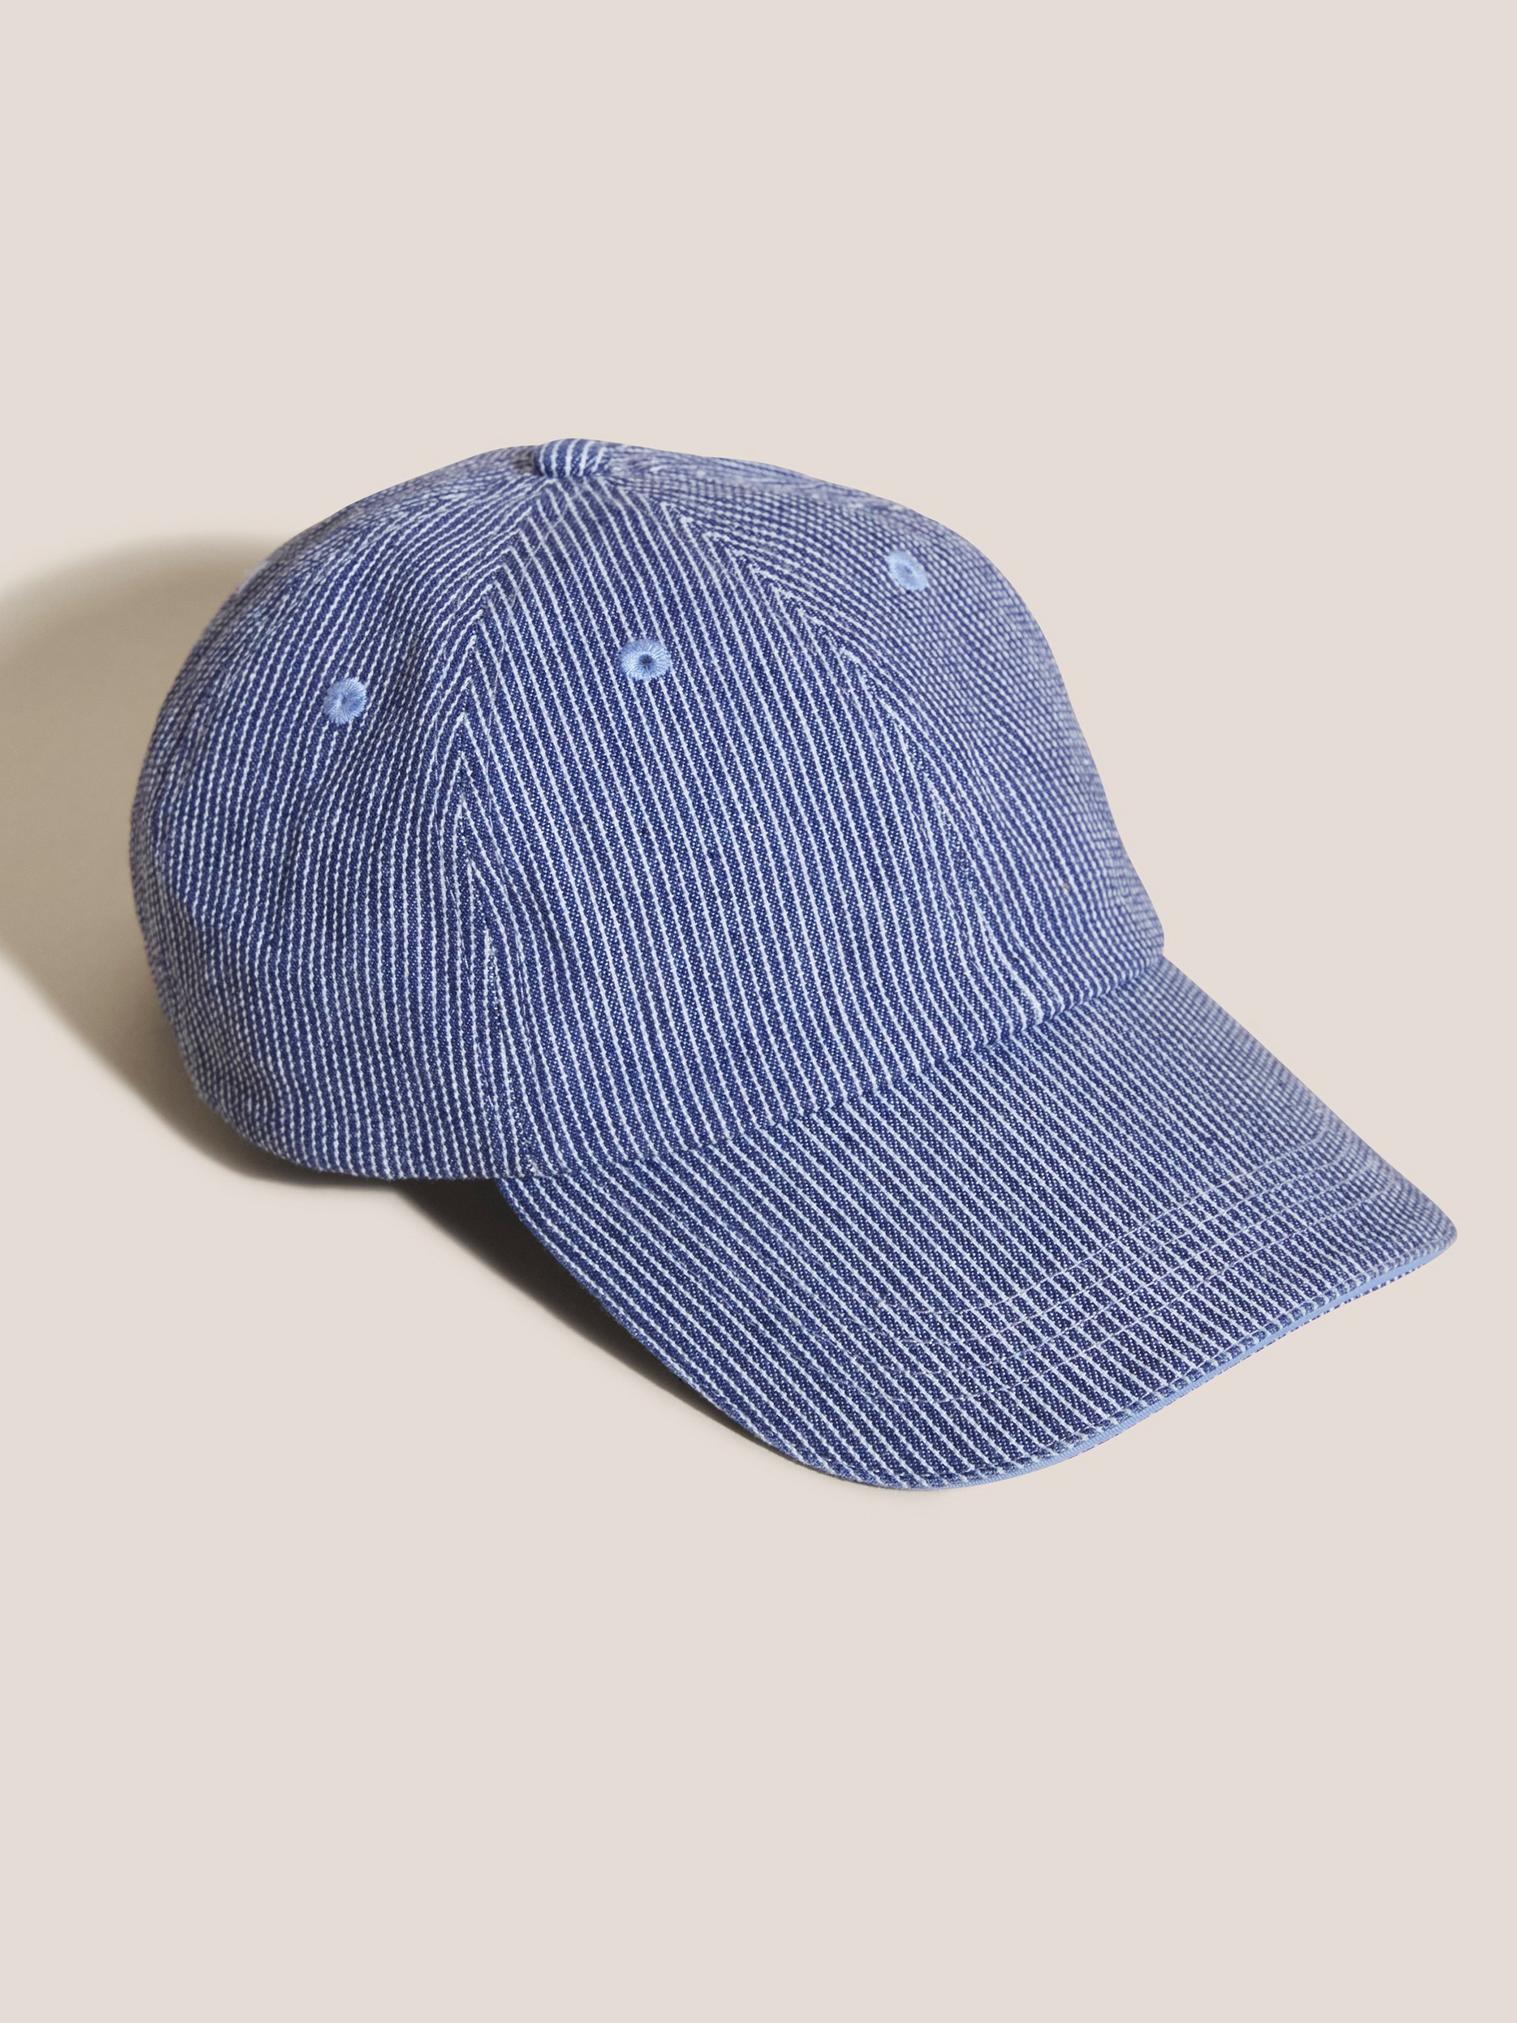 Cotton Casual Baseball Cap in BLUE MLT - FLAT FRONT